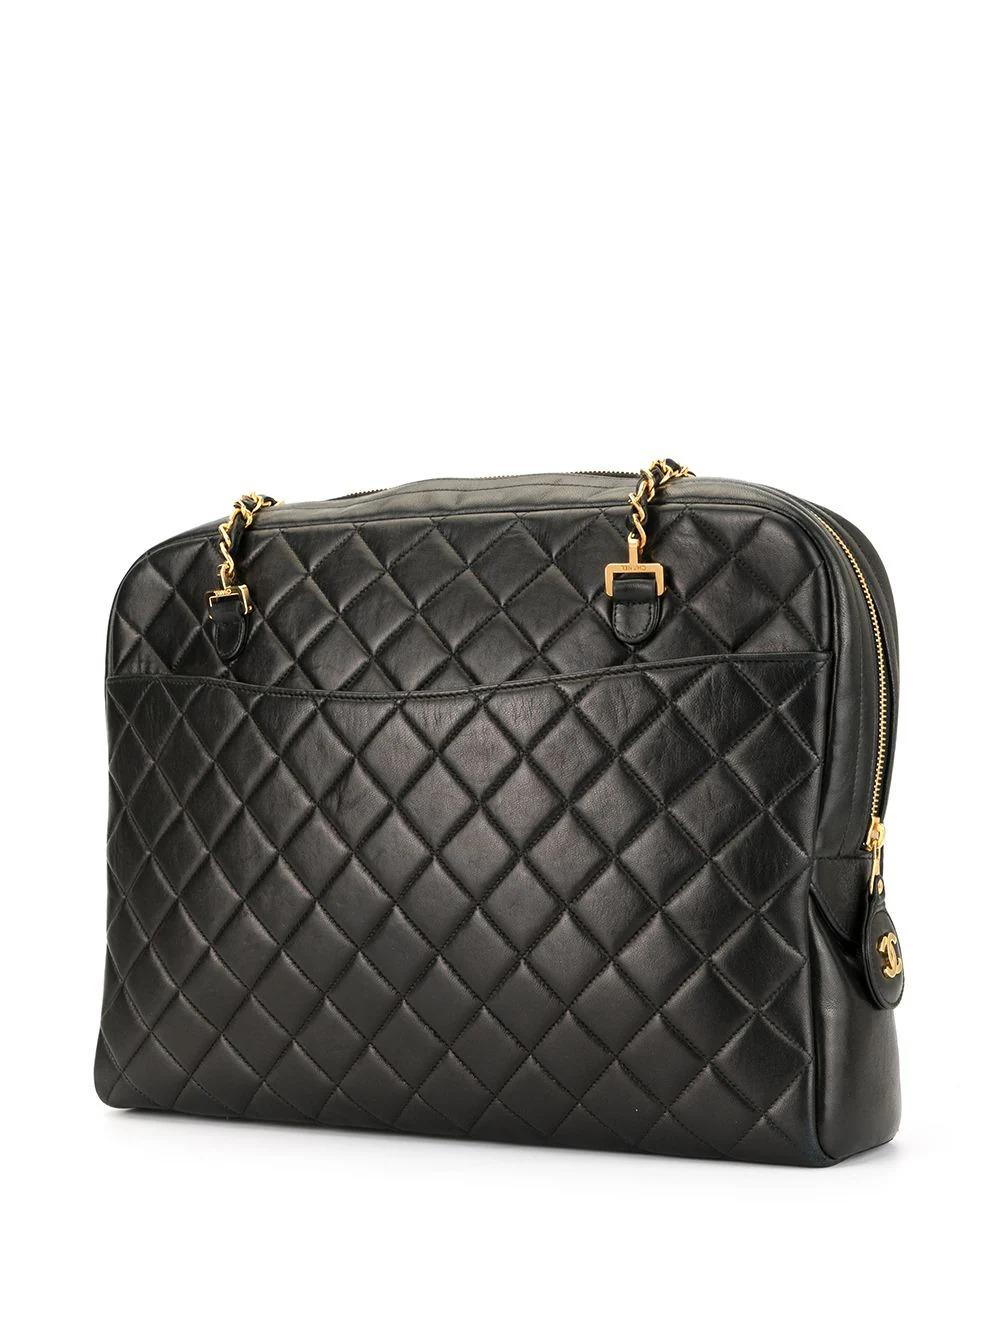 Chanel 1997 Vintage Timeless Lambskin Quilted Camera Shoulder Tote Bag In Good Condition For Sale In Miami, FL